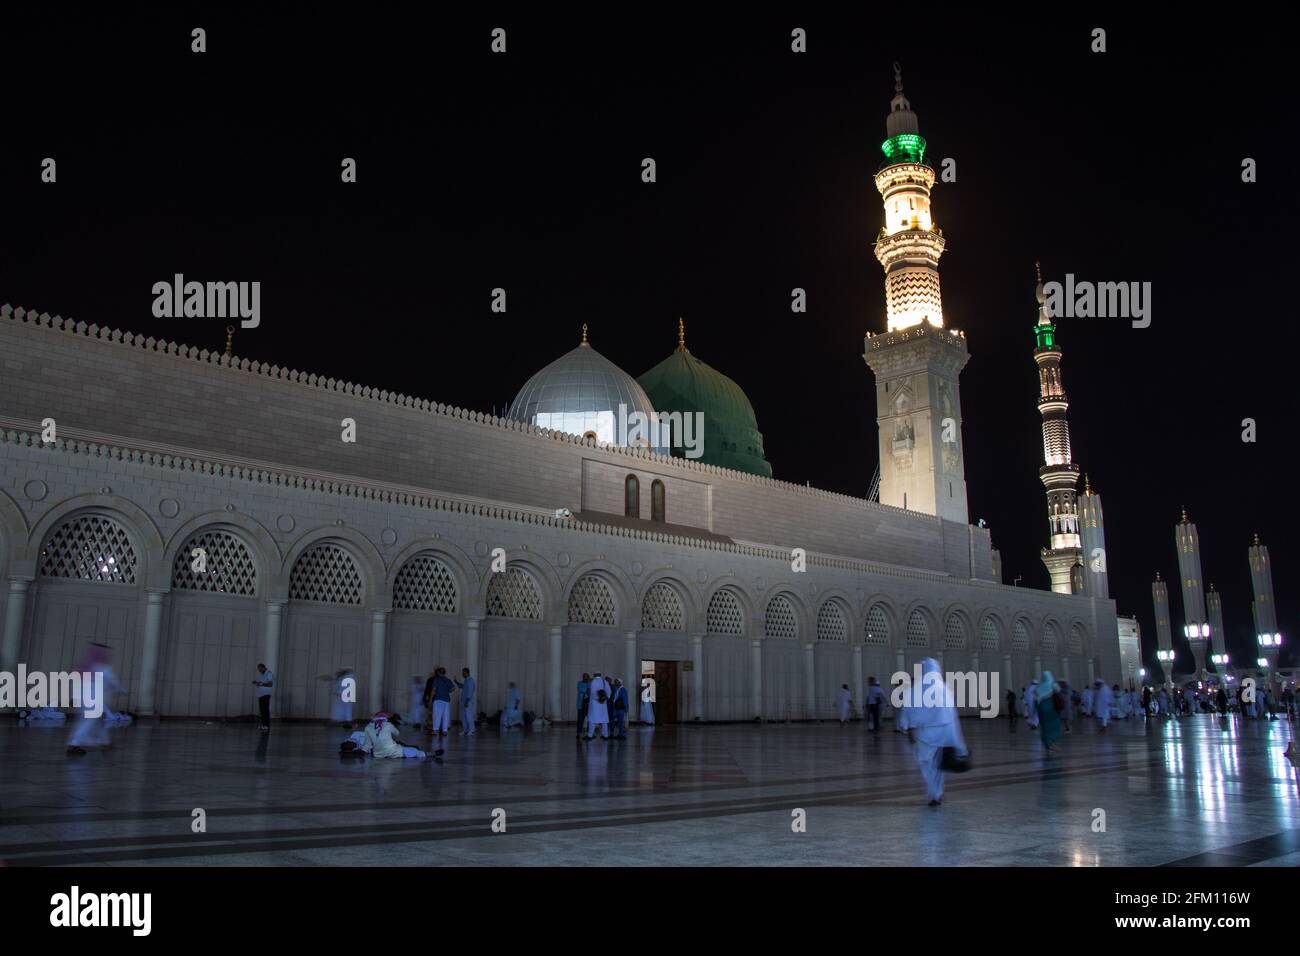 Masjid Nabawi at night time. People walking at night at the Prophet's Mosque in Medina Stock Photo